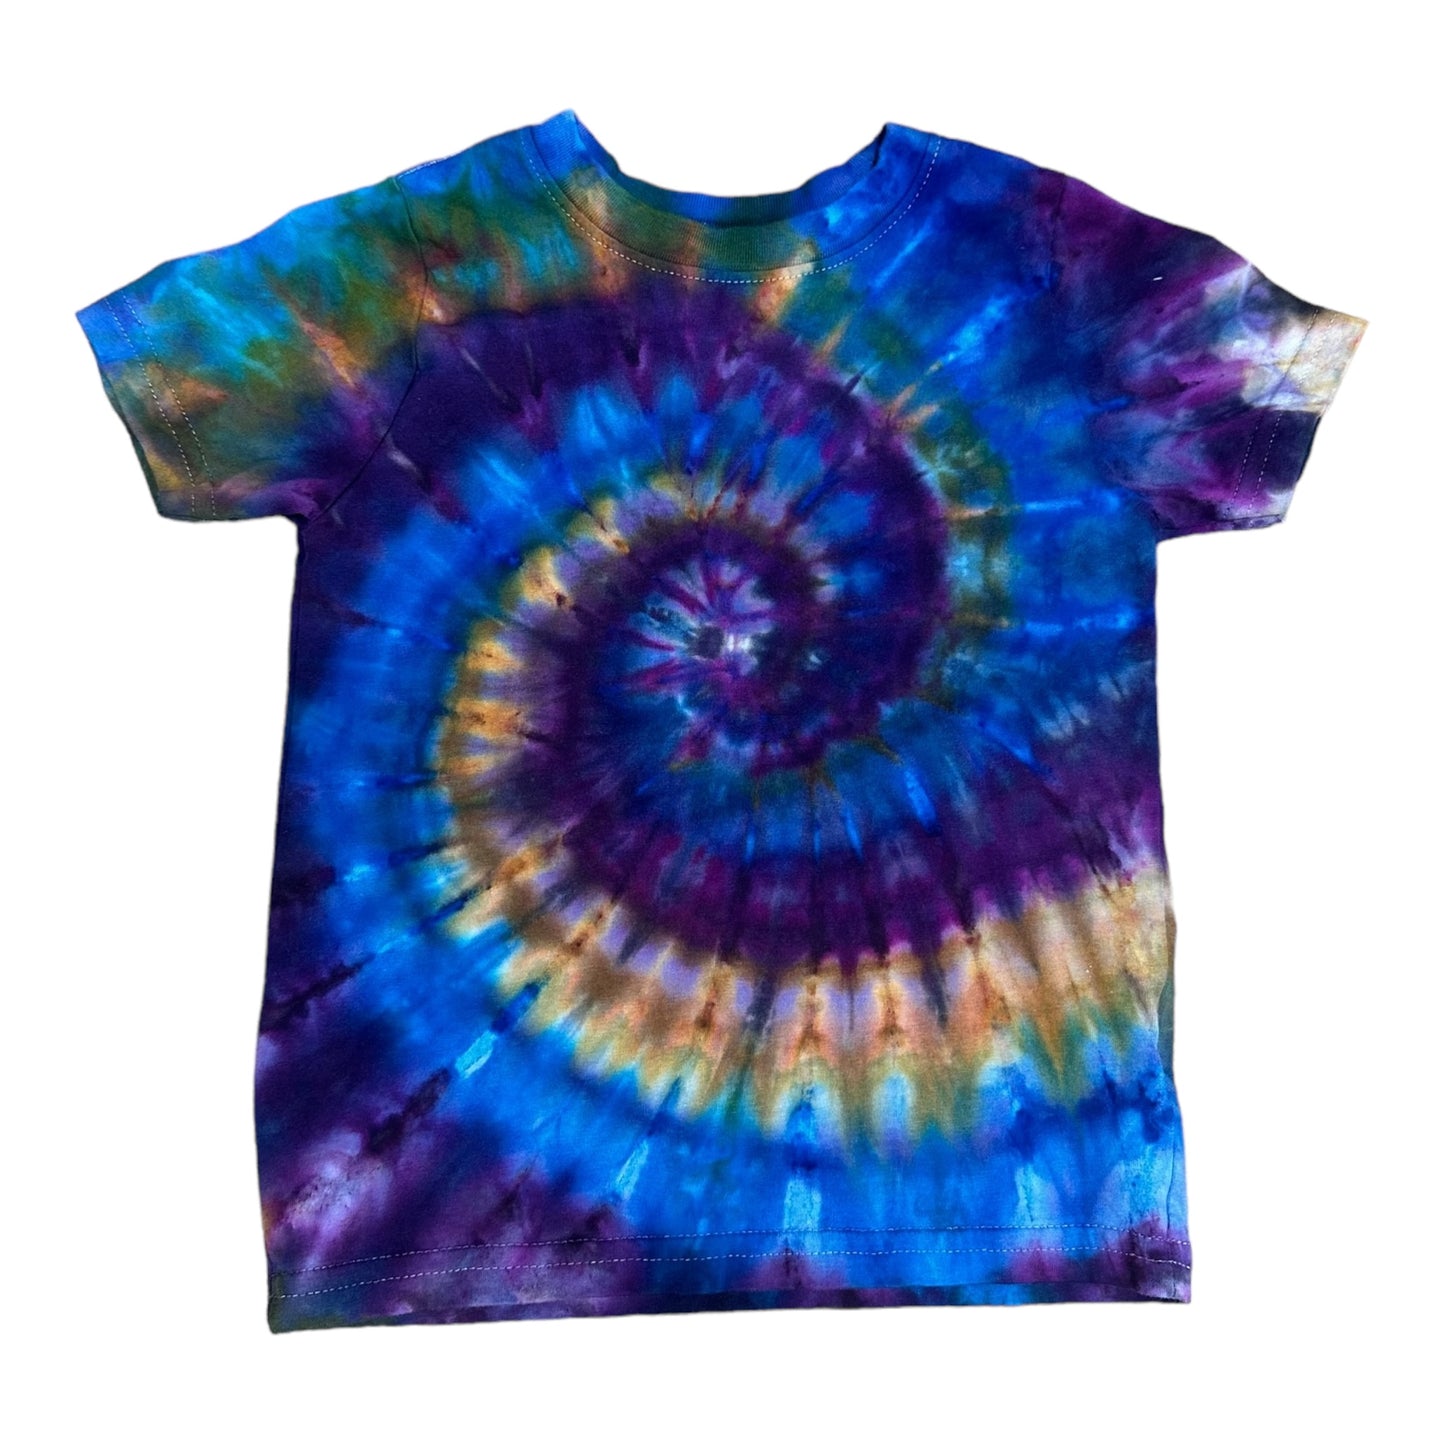 Toddler 3T Brown Green Yellow Purple and Blue Spiral Ice Dye Tie Dye Shirt